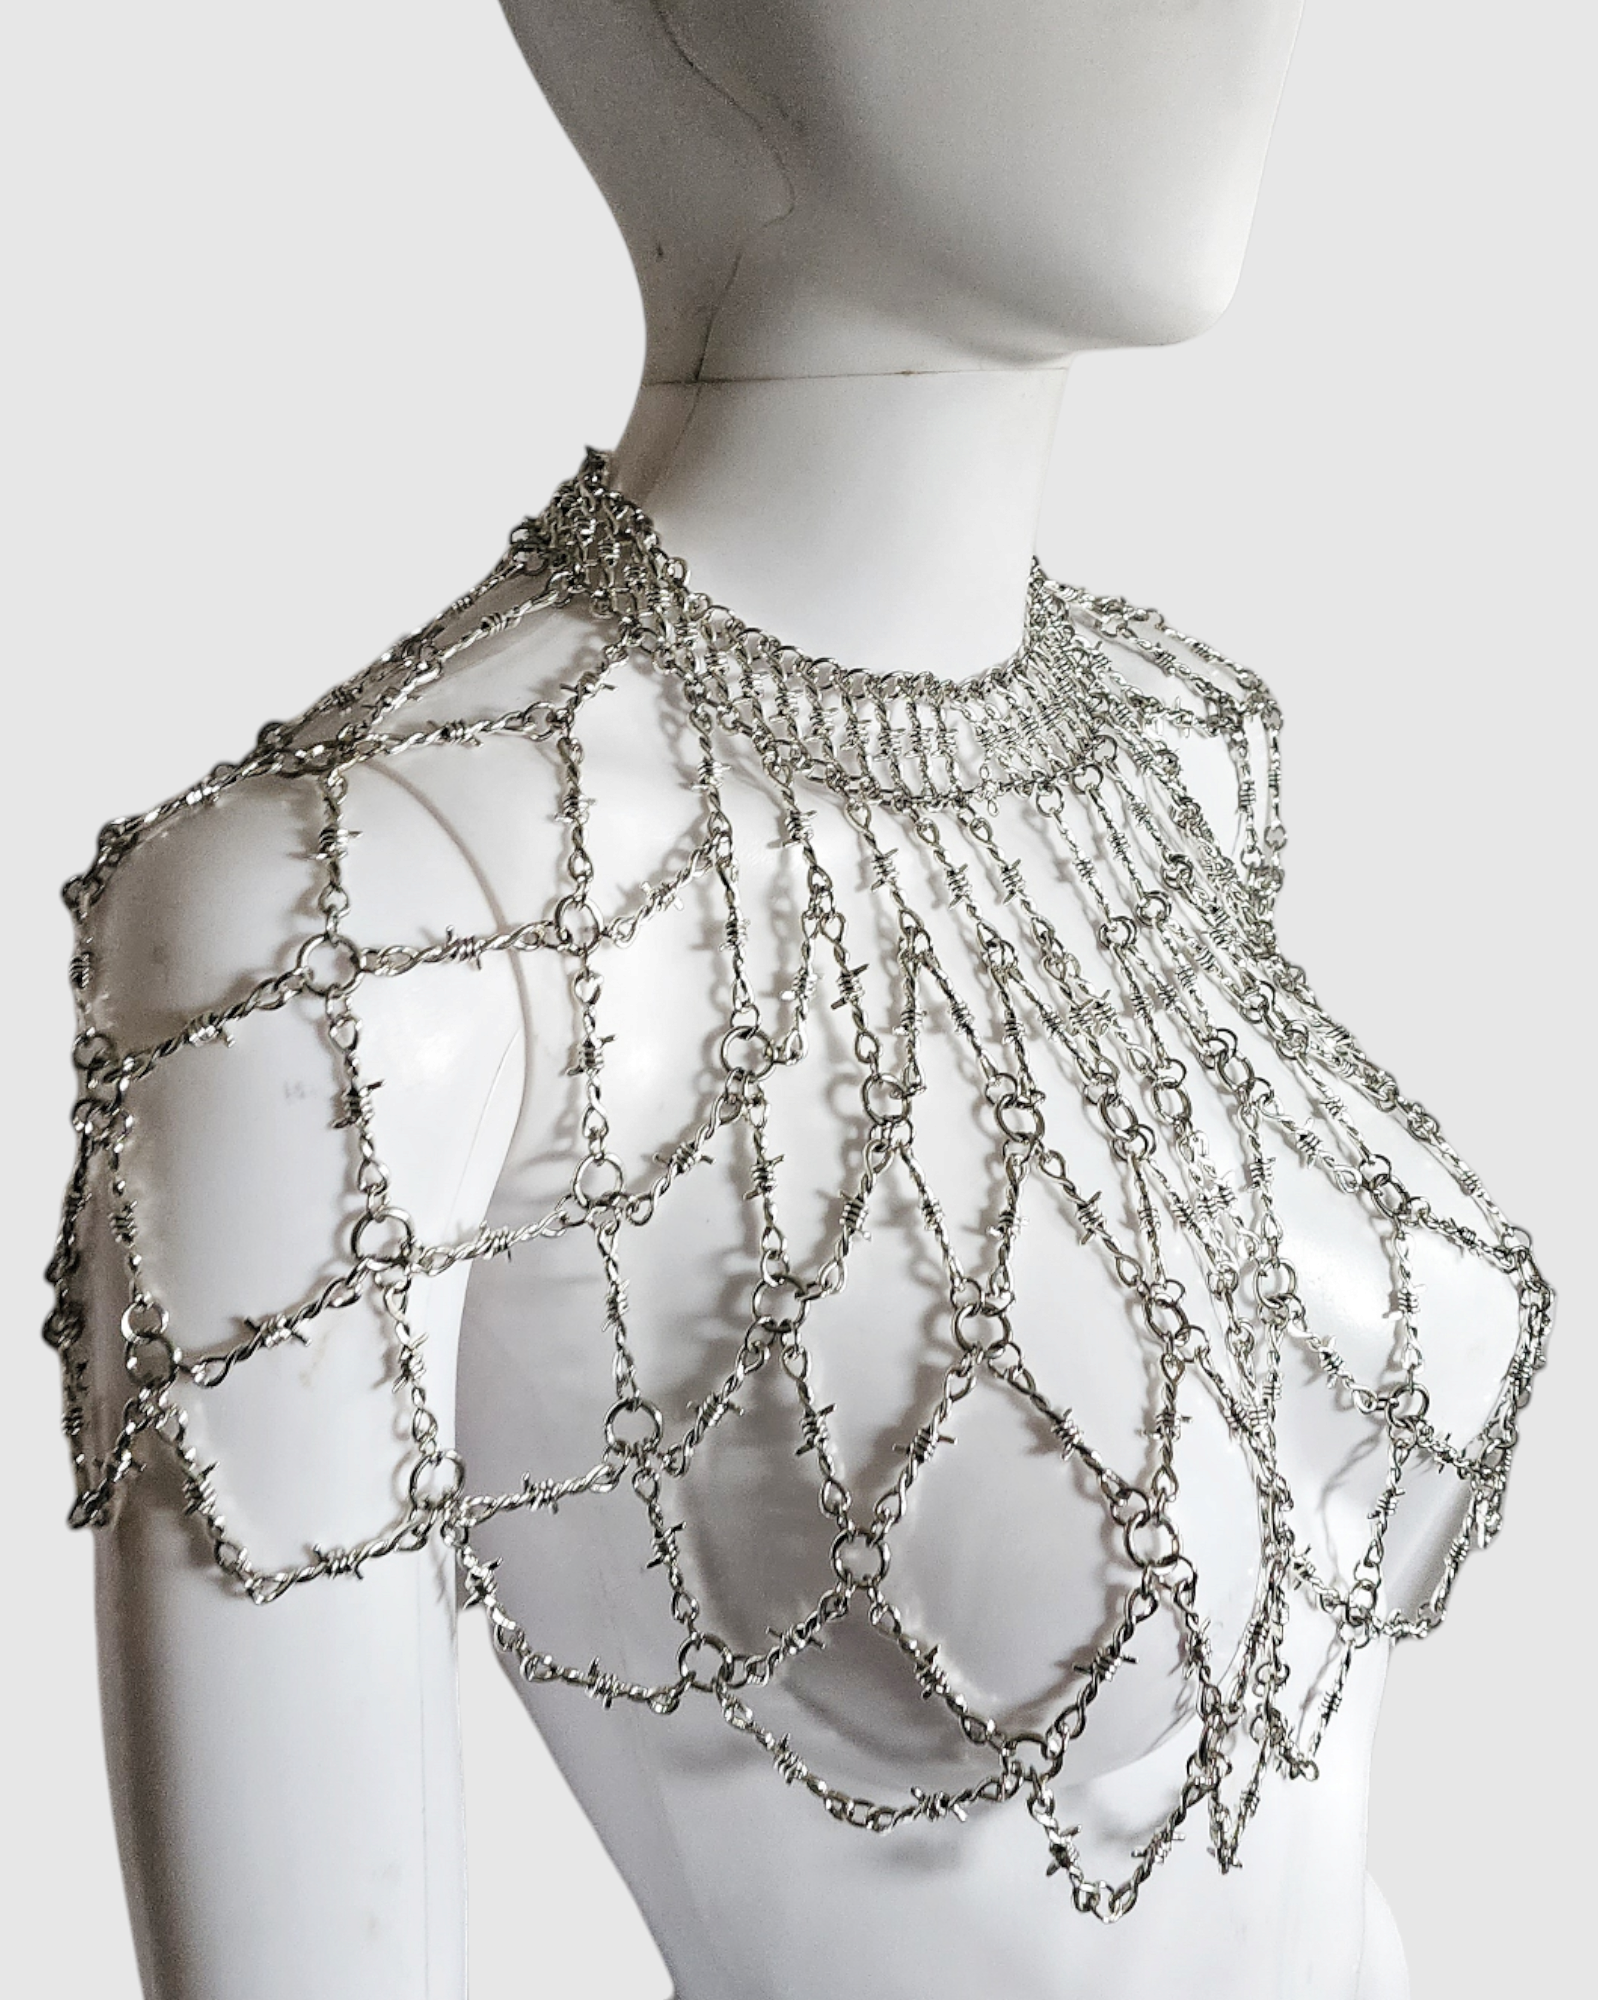 Barbed Wire Chainmaille Queens Armor Hauberk